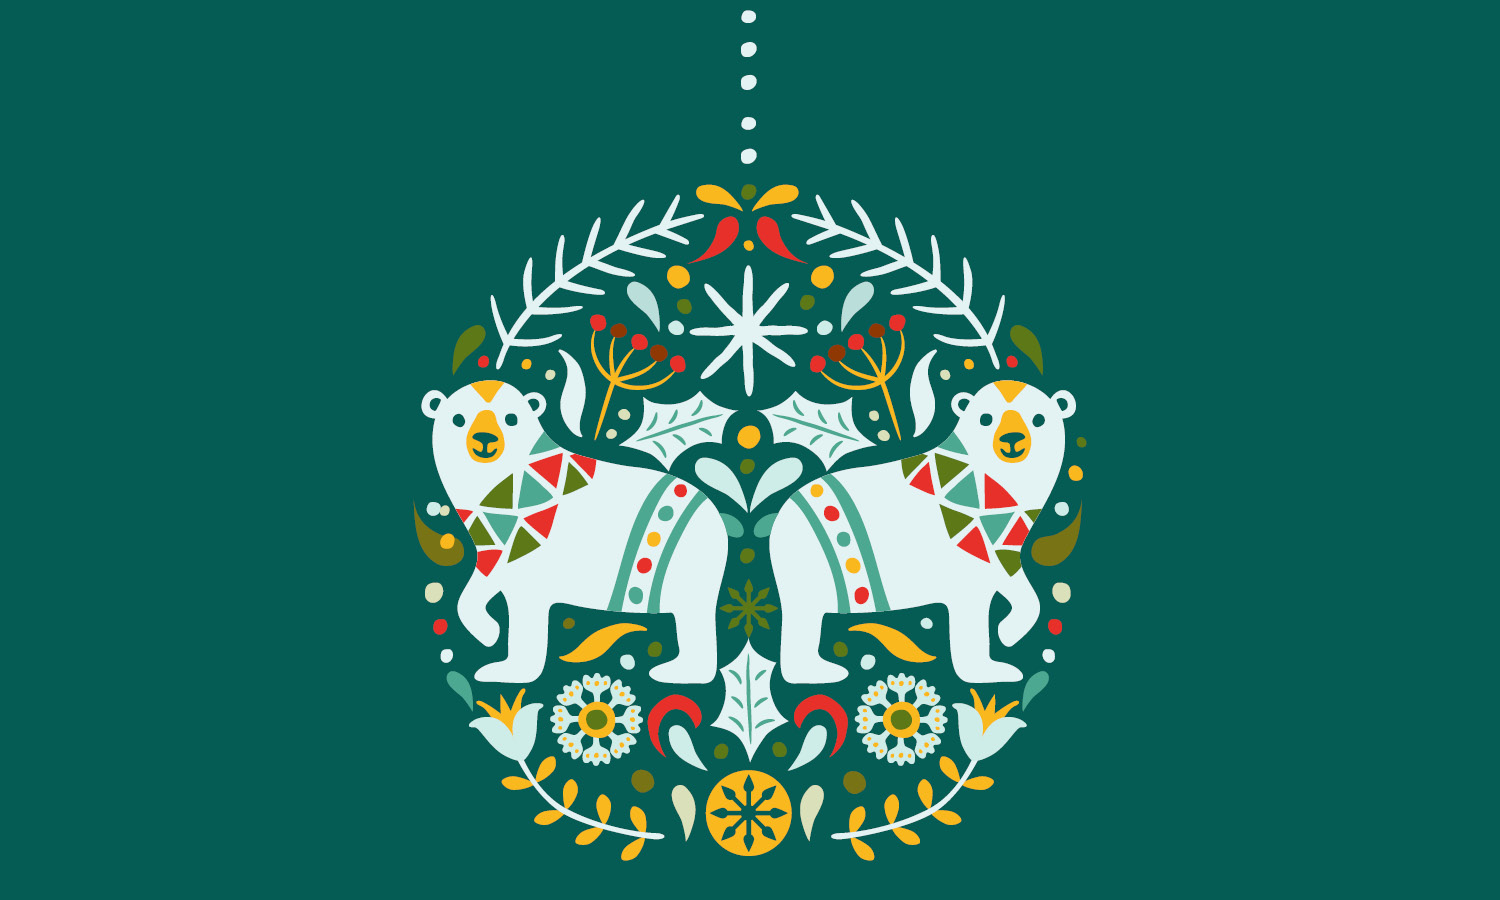 Illustration of ornament with polar bears, holly, and flowers.